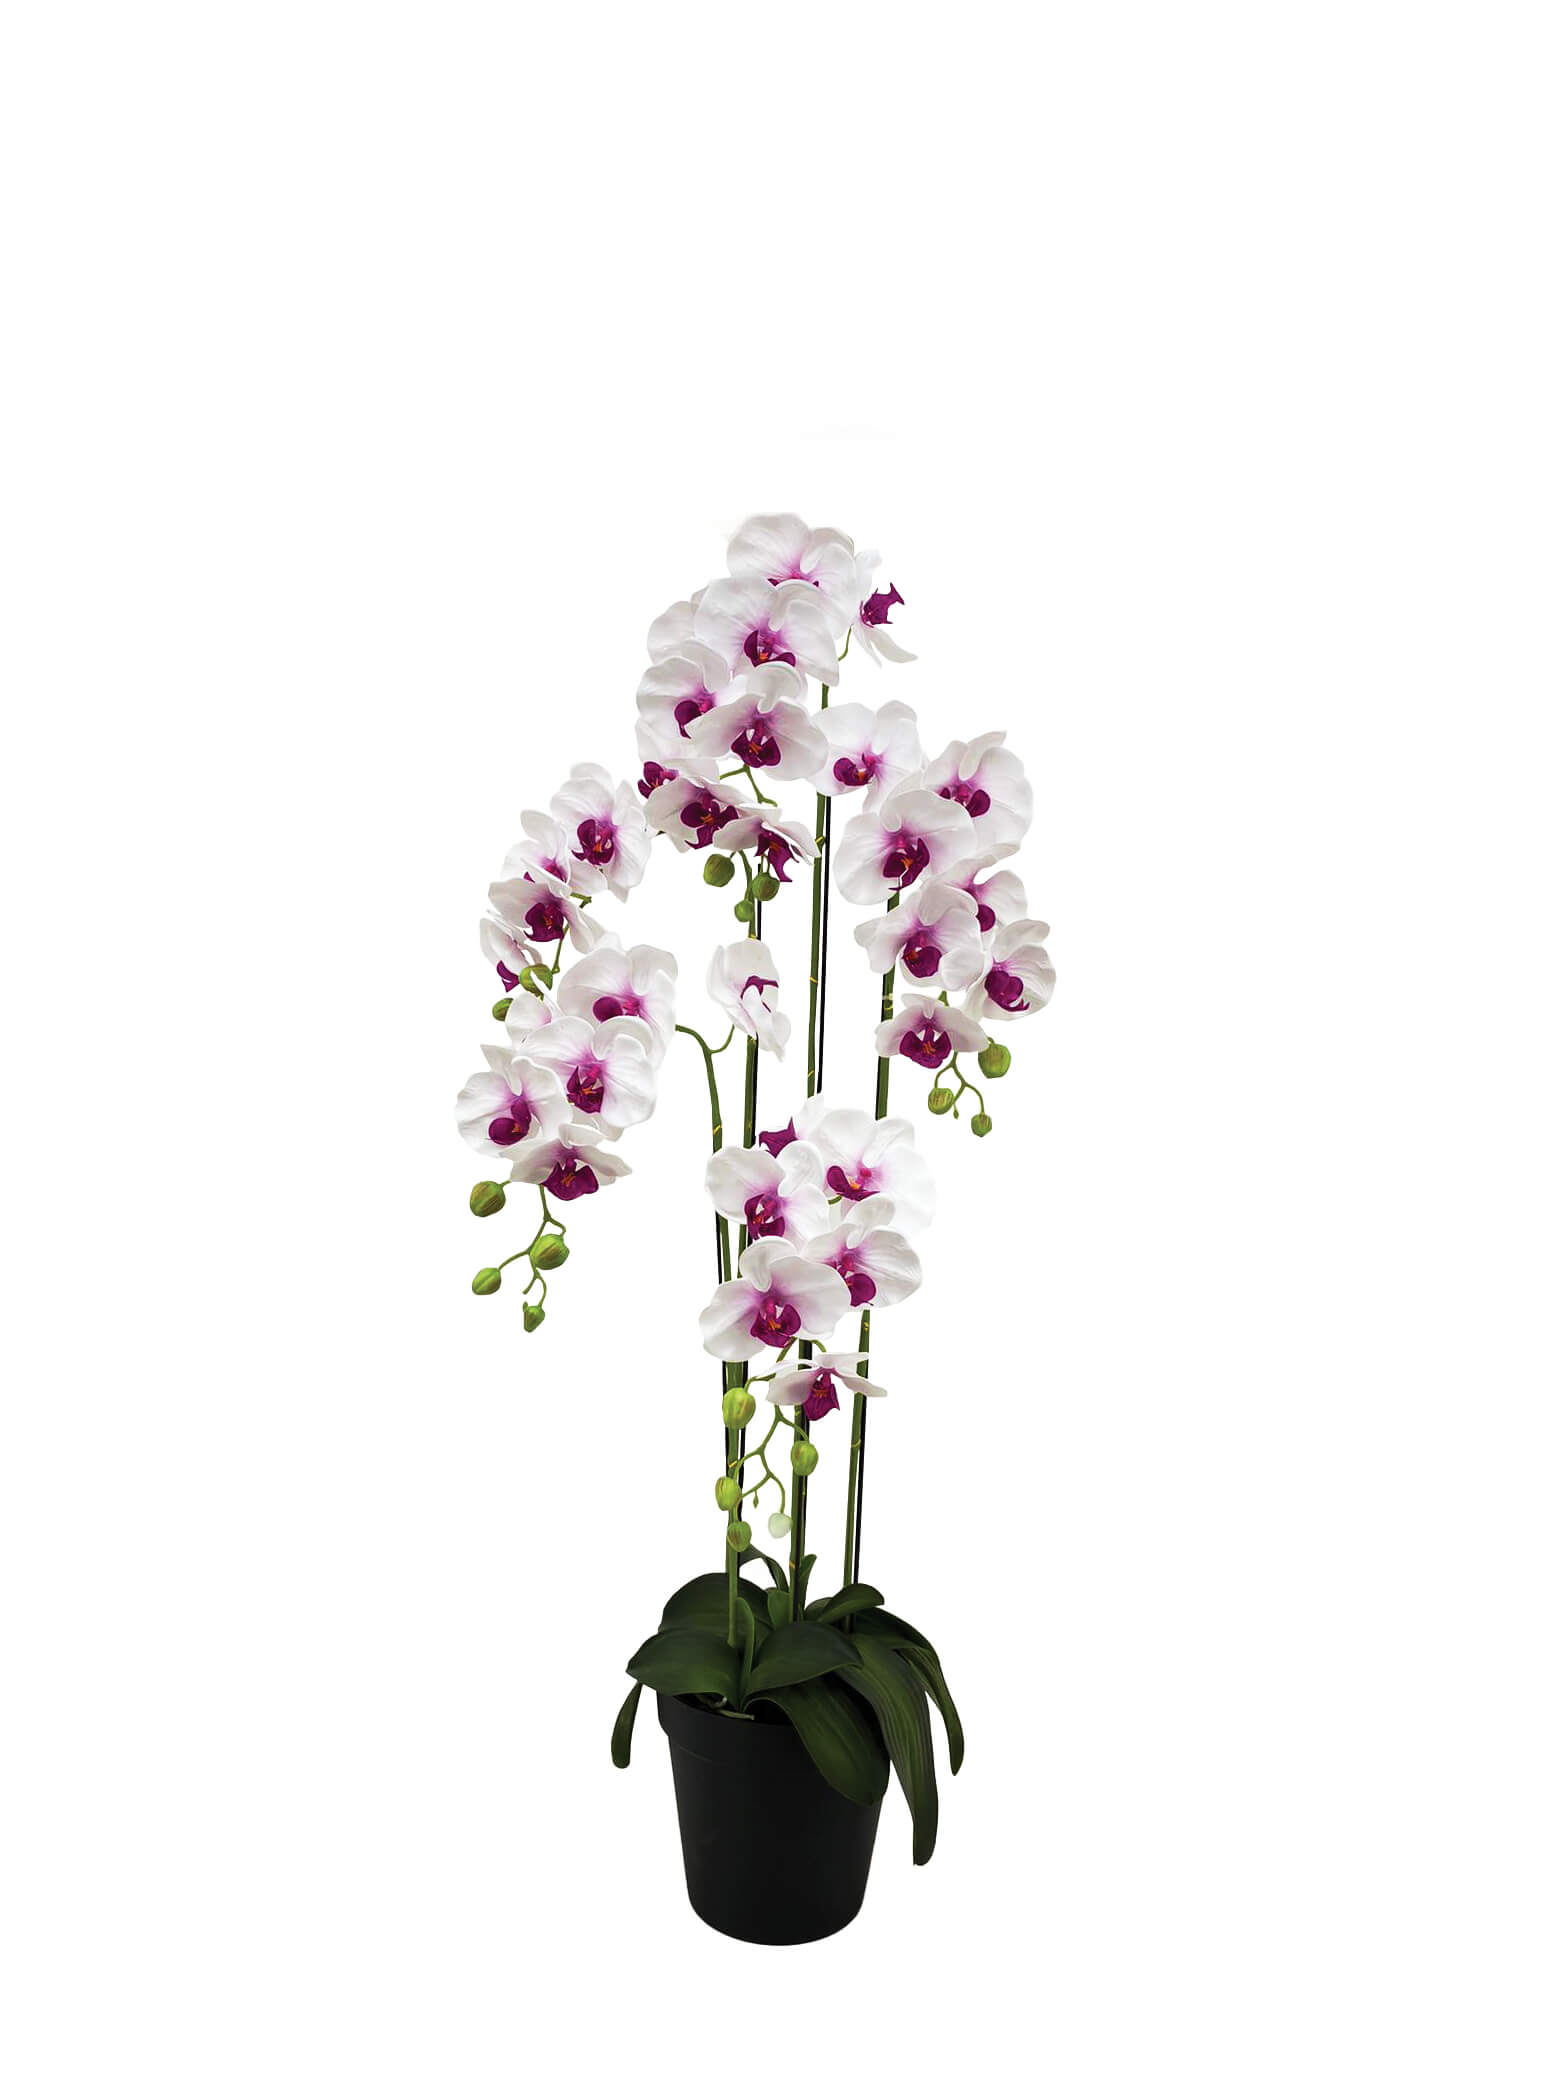 5 Stalk Potted White and Fuchsia Orchid